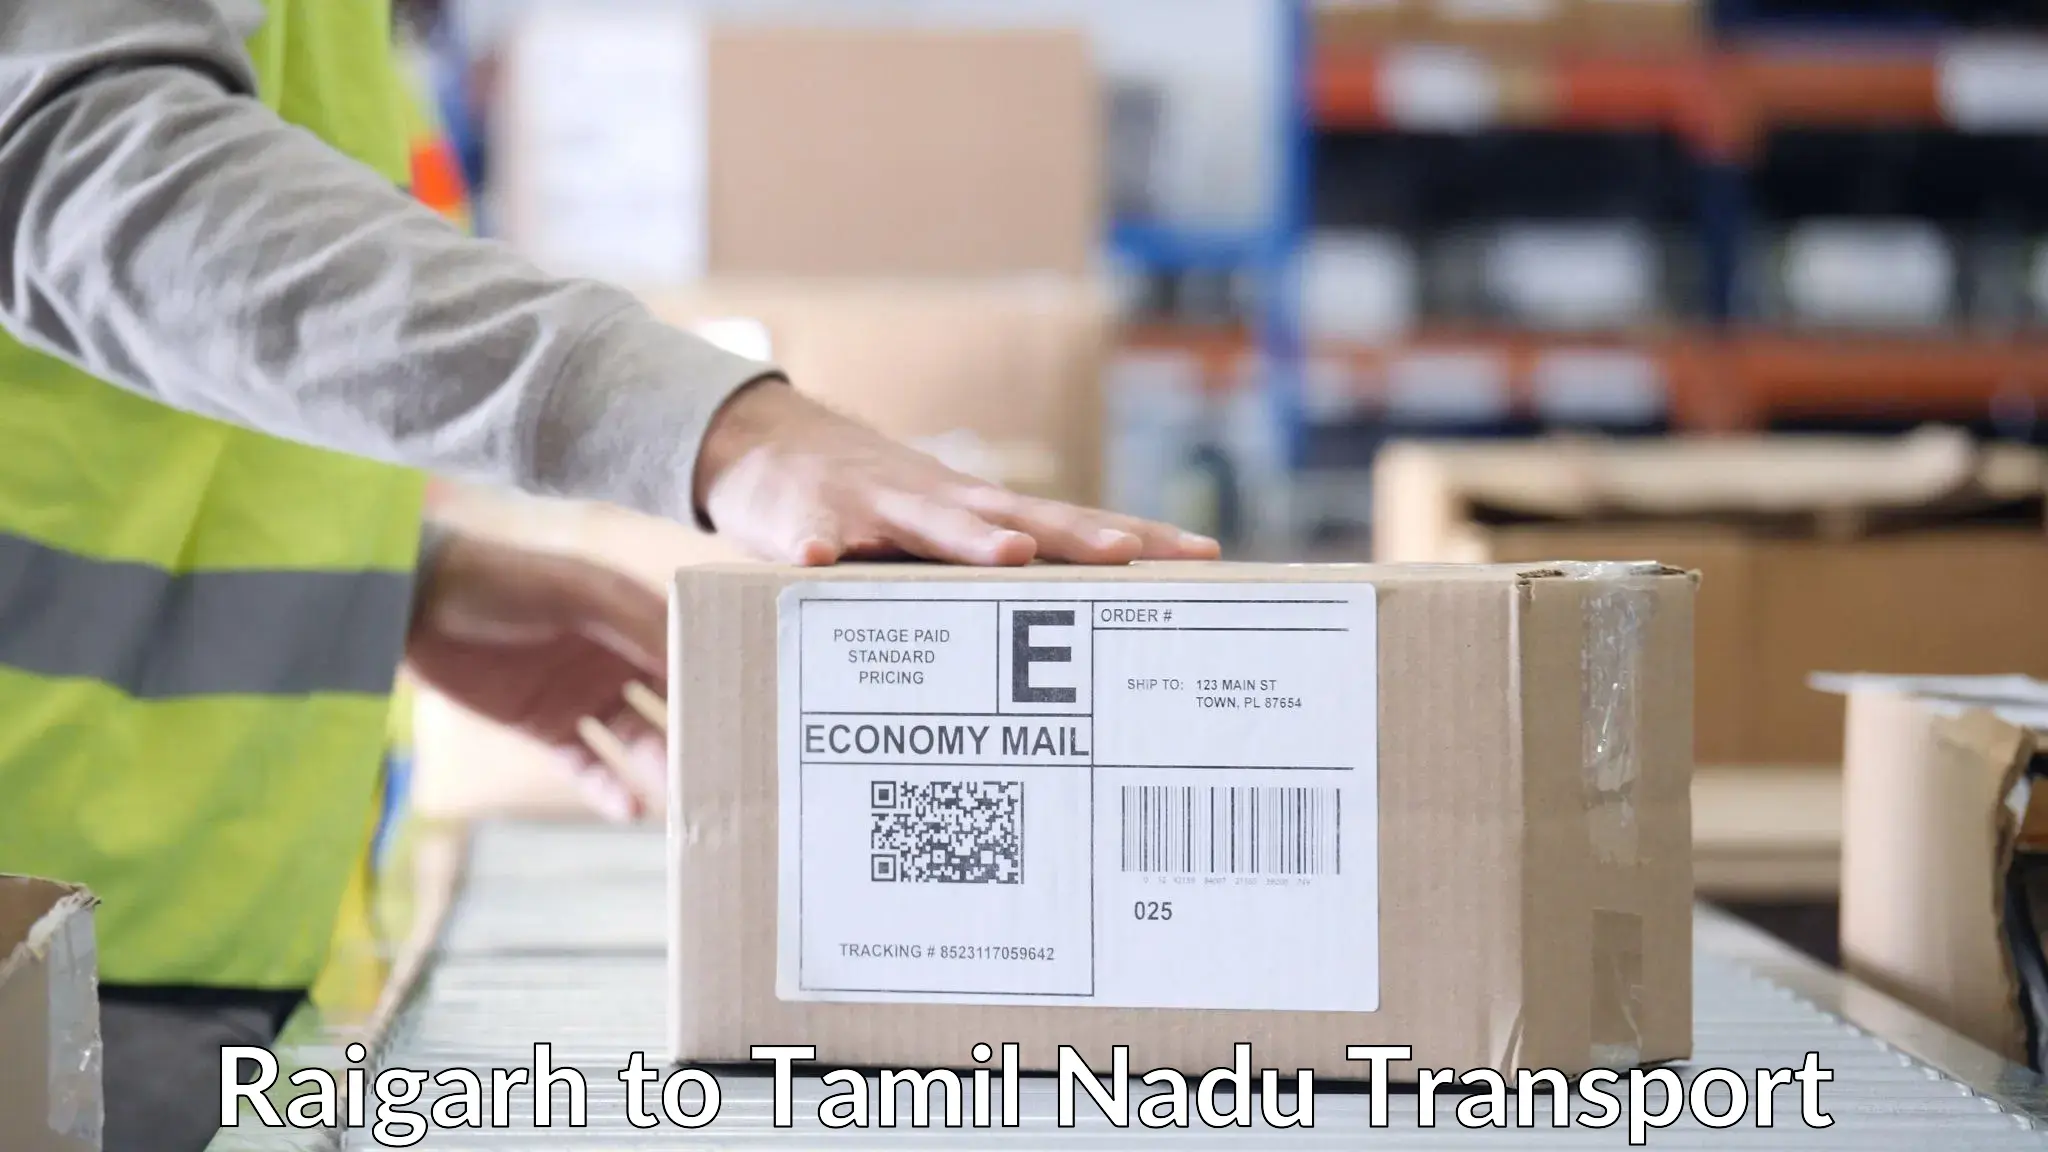 Goods delivery service Raigarh to Tamil Nadu